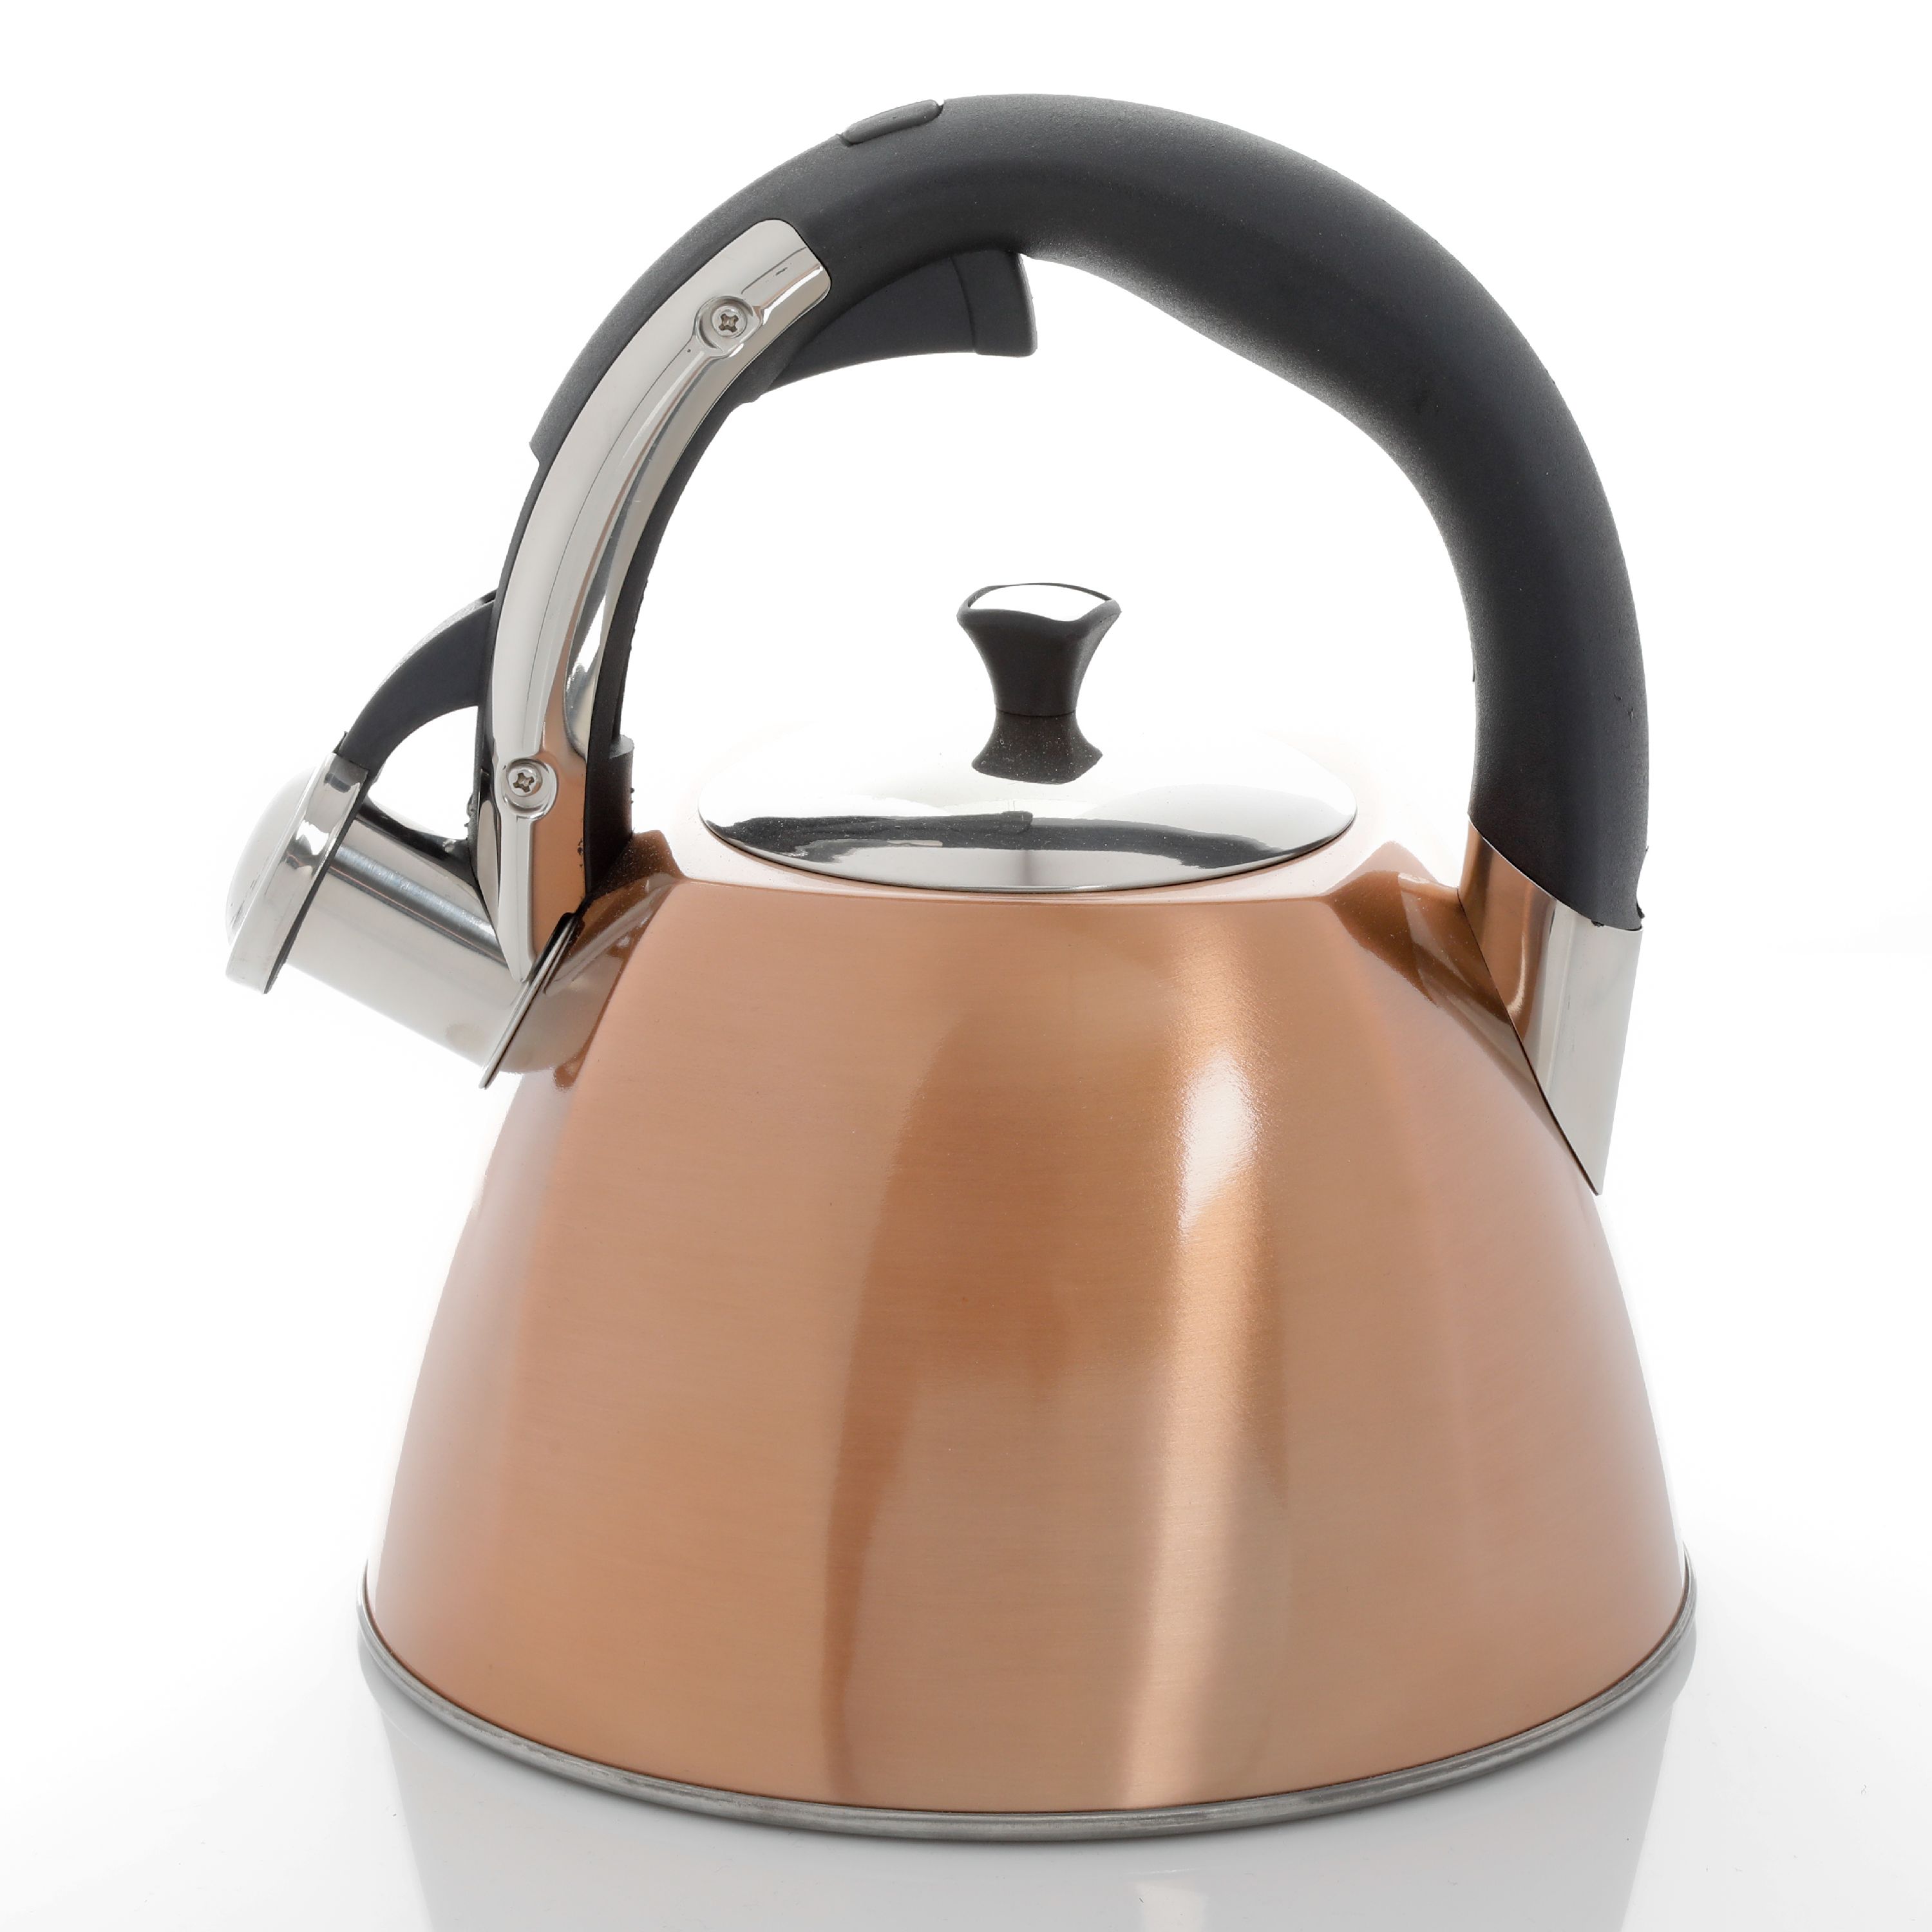 Mr. Coffee Belgrove 2.5 Quart Stainless Steel Tea Kettle in Copper - image 2 of 7